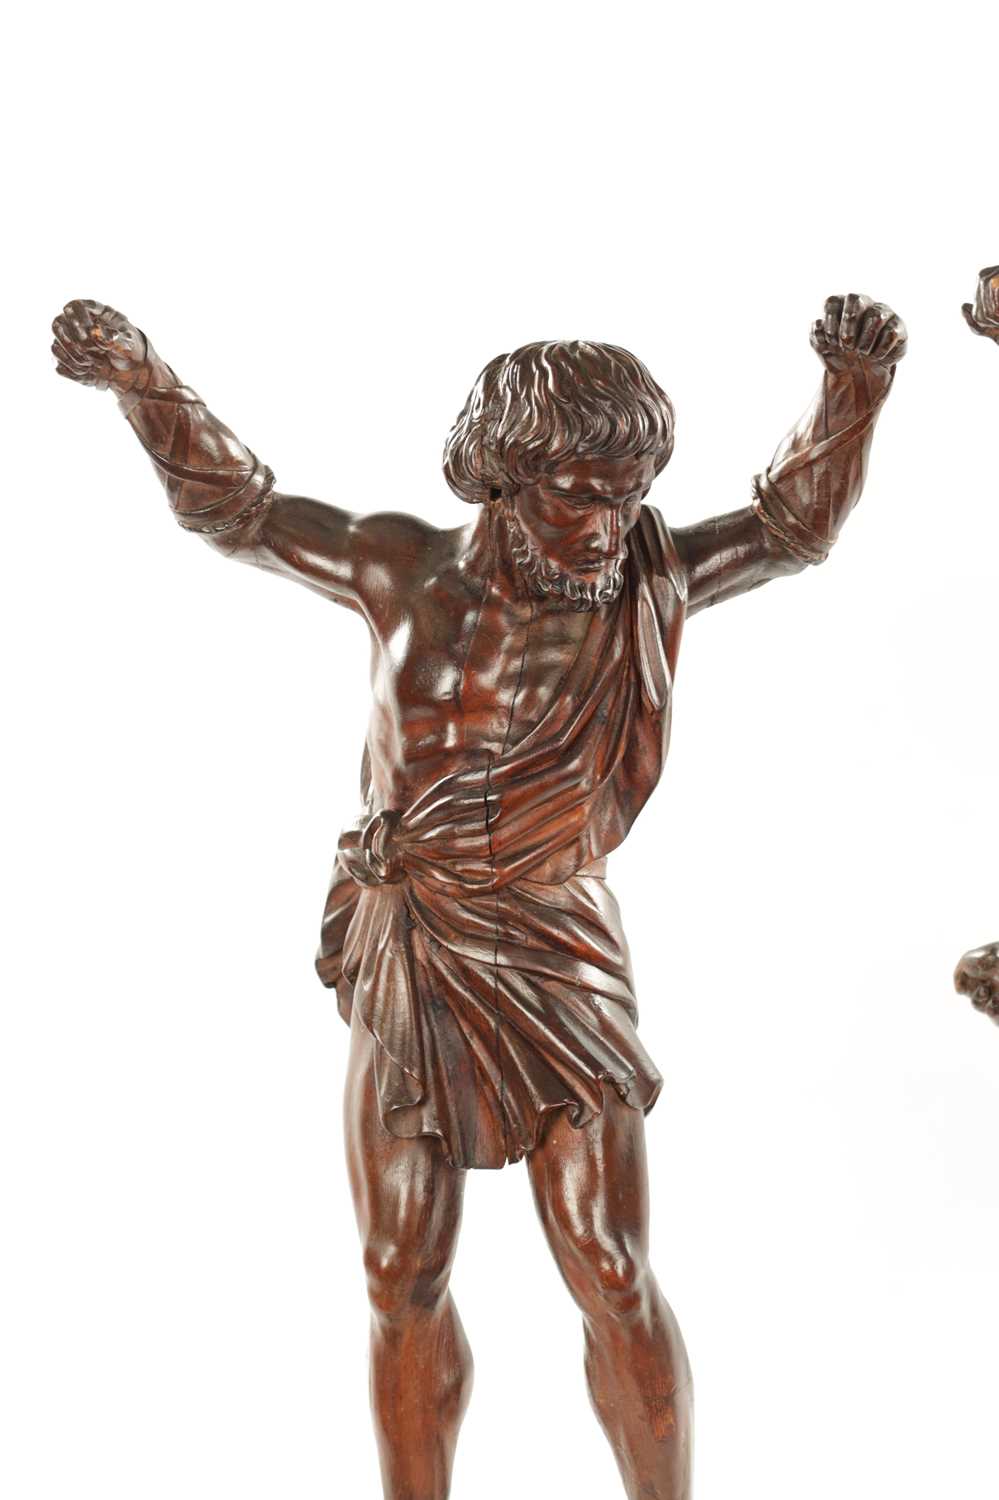 A PAIR OF GRAND TOUR CARVED WALNUT GLADIATORS AFTER THE BORGHESE BRONZE ROMAN FIGURES - Image 5 of 11